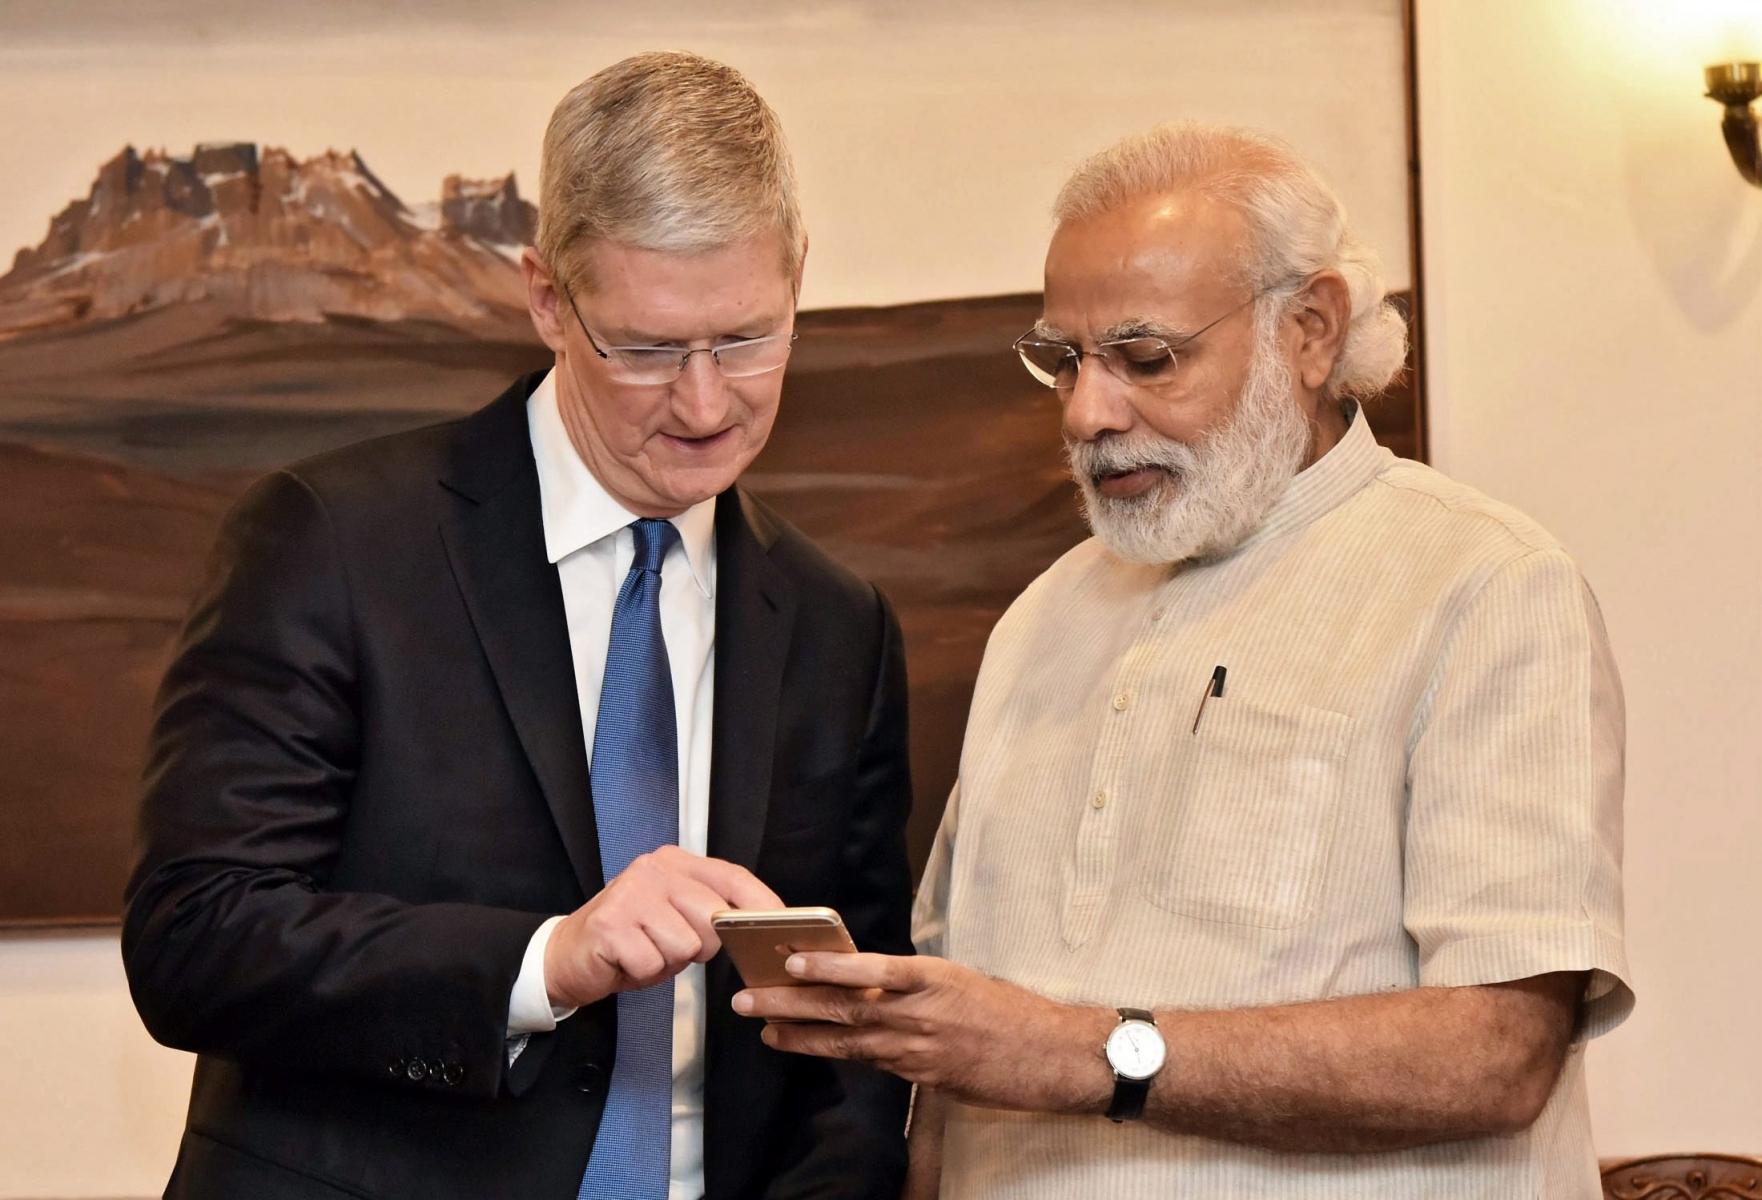 epa05321305 A handout photograph released by the Indian Press Information Bureau (PIB) shows Apple Chief Executive Officer Tim Cook (L), during a meeting with the Indian Prime Minister Narendra Modi (R) in New Delhi, India, 21 May 2016. Cook is on a four-day visit to India.  EPA/GOVERNMENT OF INDIA / HANDOUT PRESS INFORMATION BUREAU, GOVERNMENT OF INDIA/HANDOUT EDITORIAL USE ONLY/NO SALES/NO ARCHIVES HANDOUT EDITORIAL USE ONLY/NO SALES/NO ARCHIVES INDIA TIM COOK VISIT